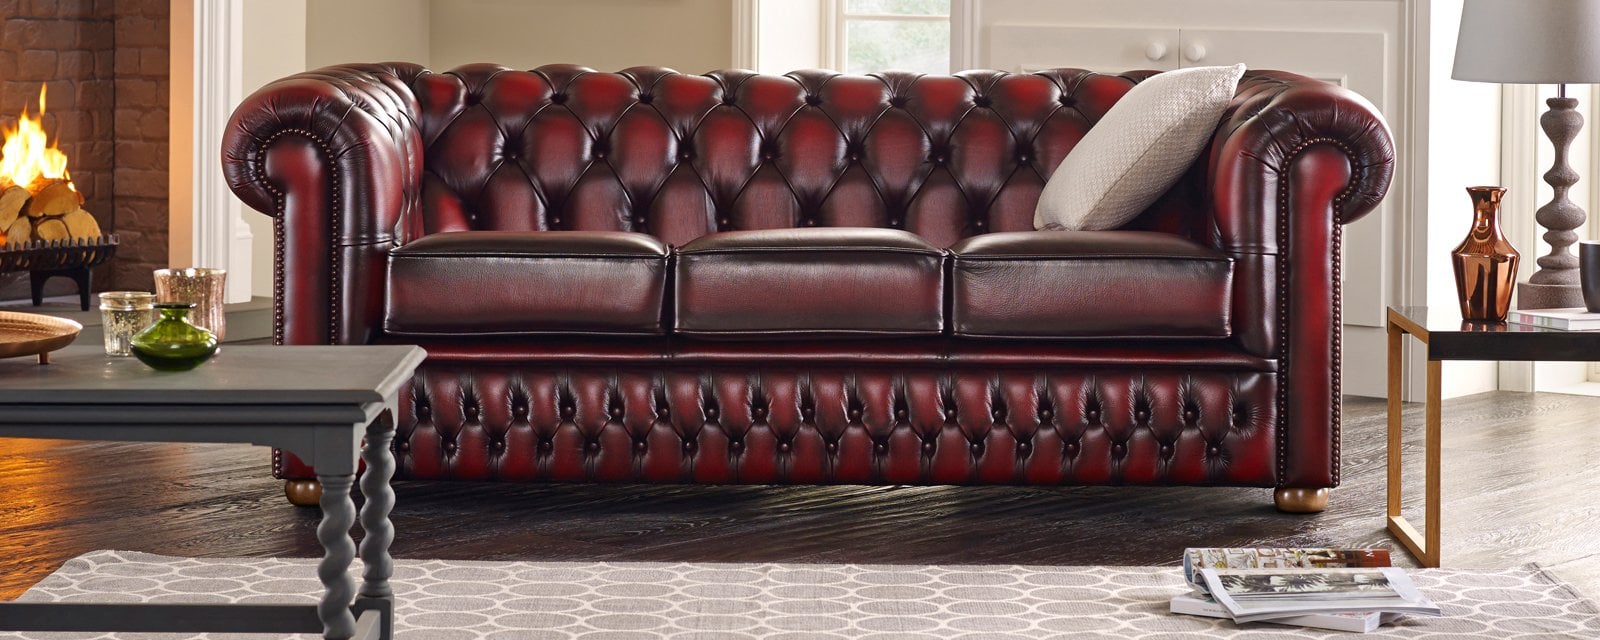 How To Buy A Quality Leather Sofa